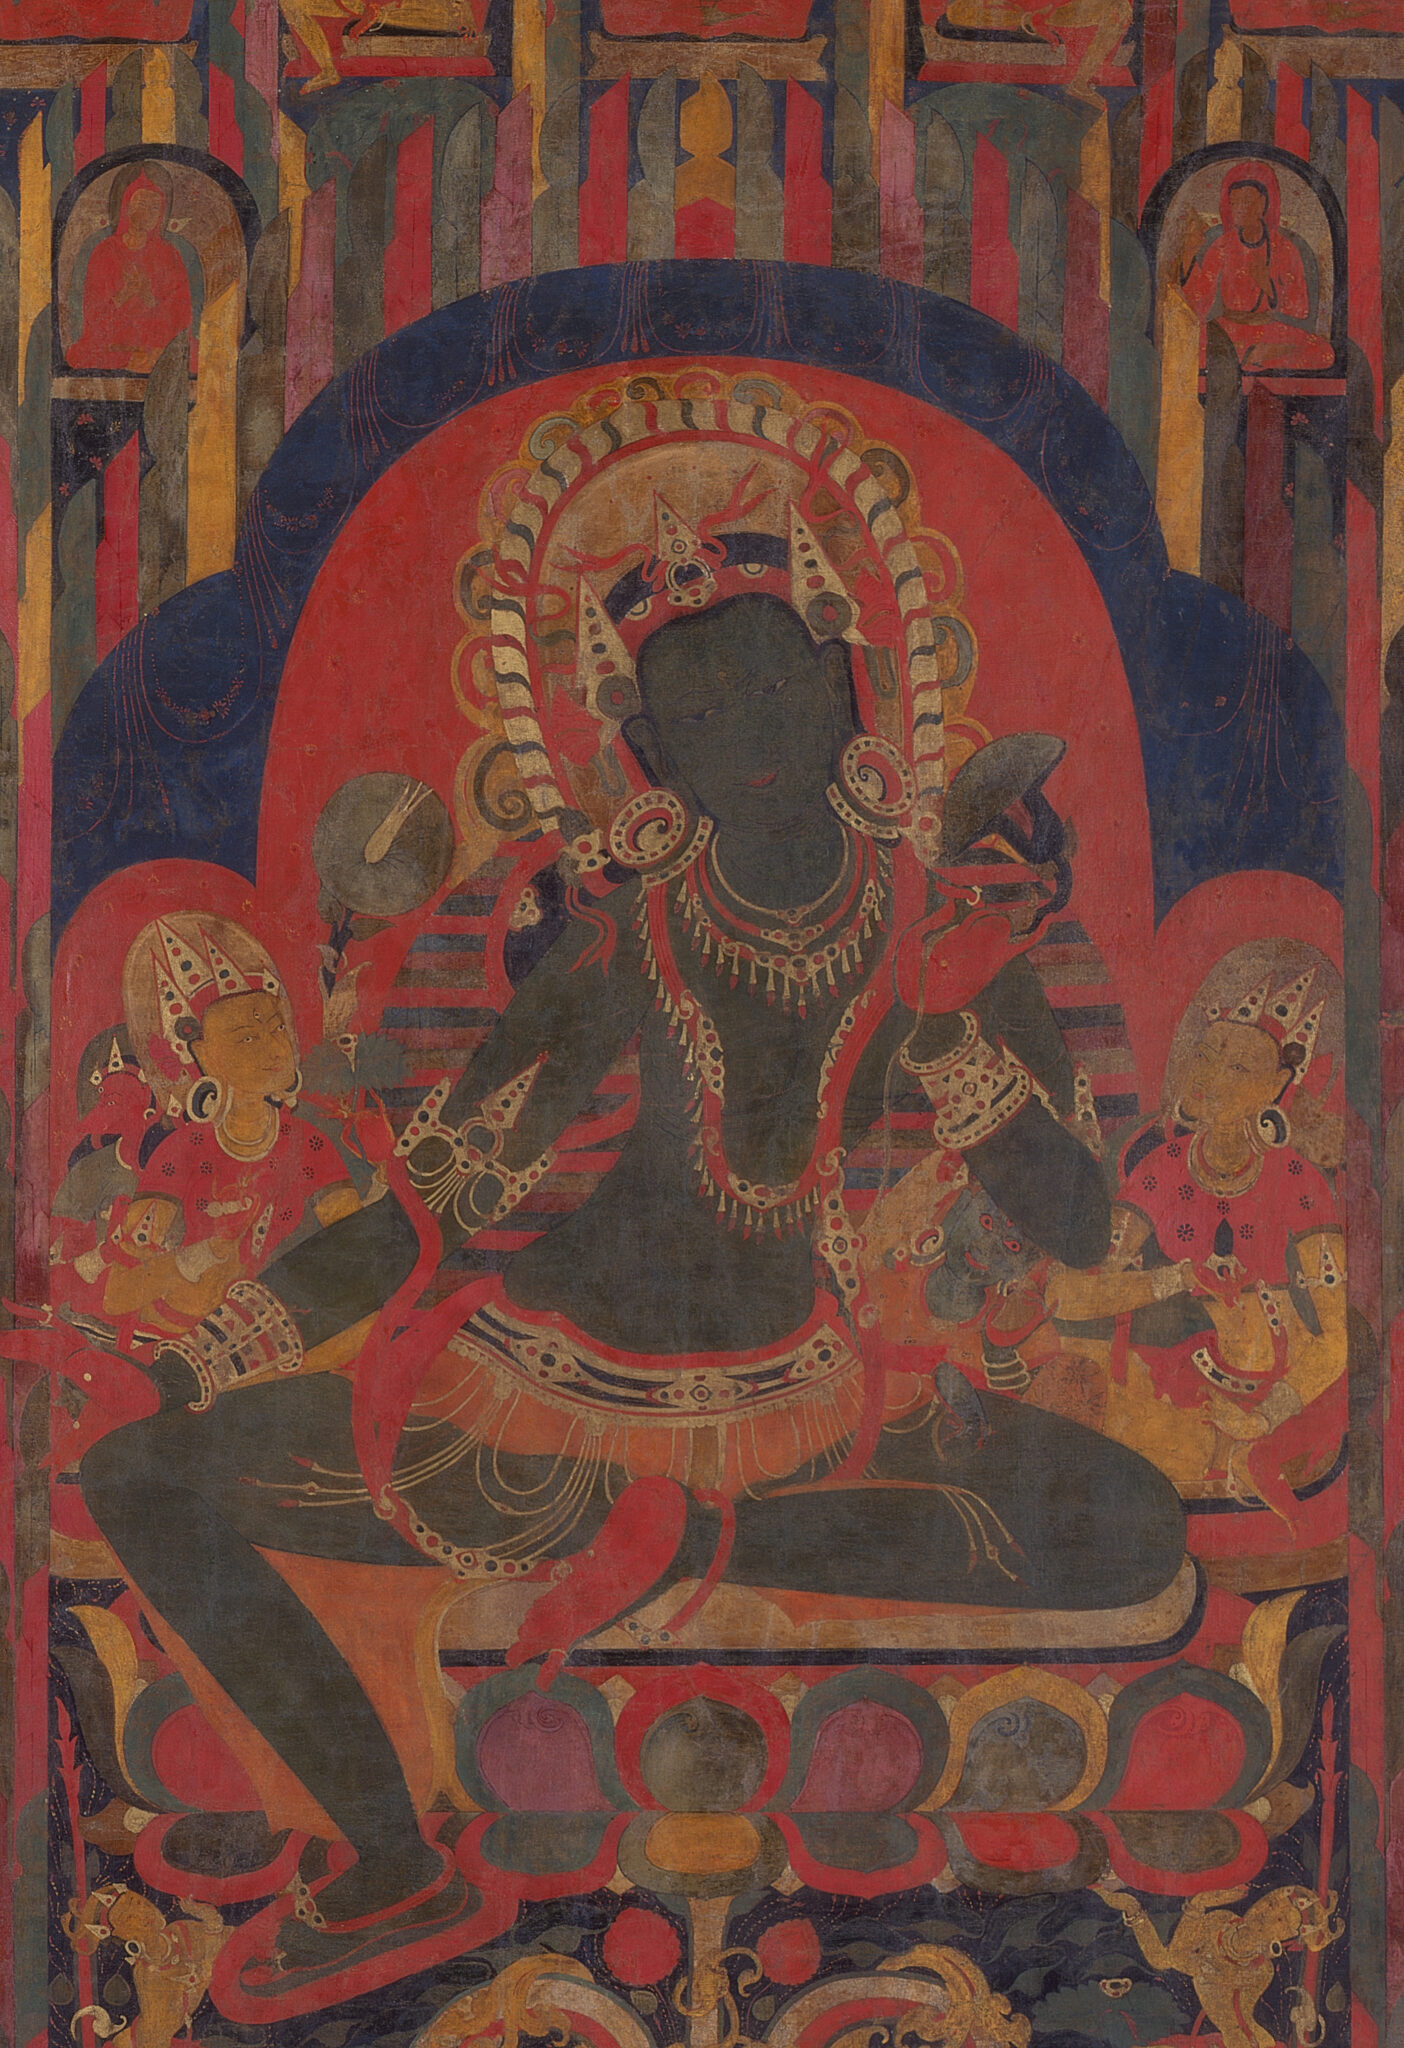 Close view of green-skinned Bodhisattva flanked by crowned deities, enclosed in red and blue nimbus